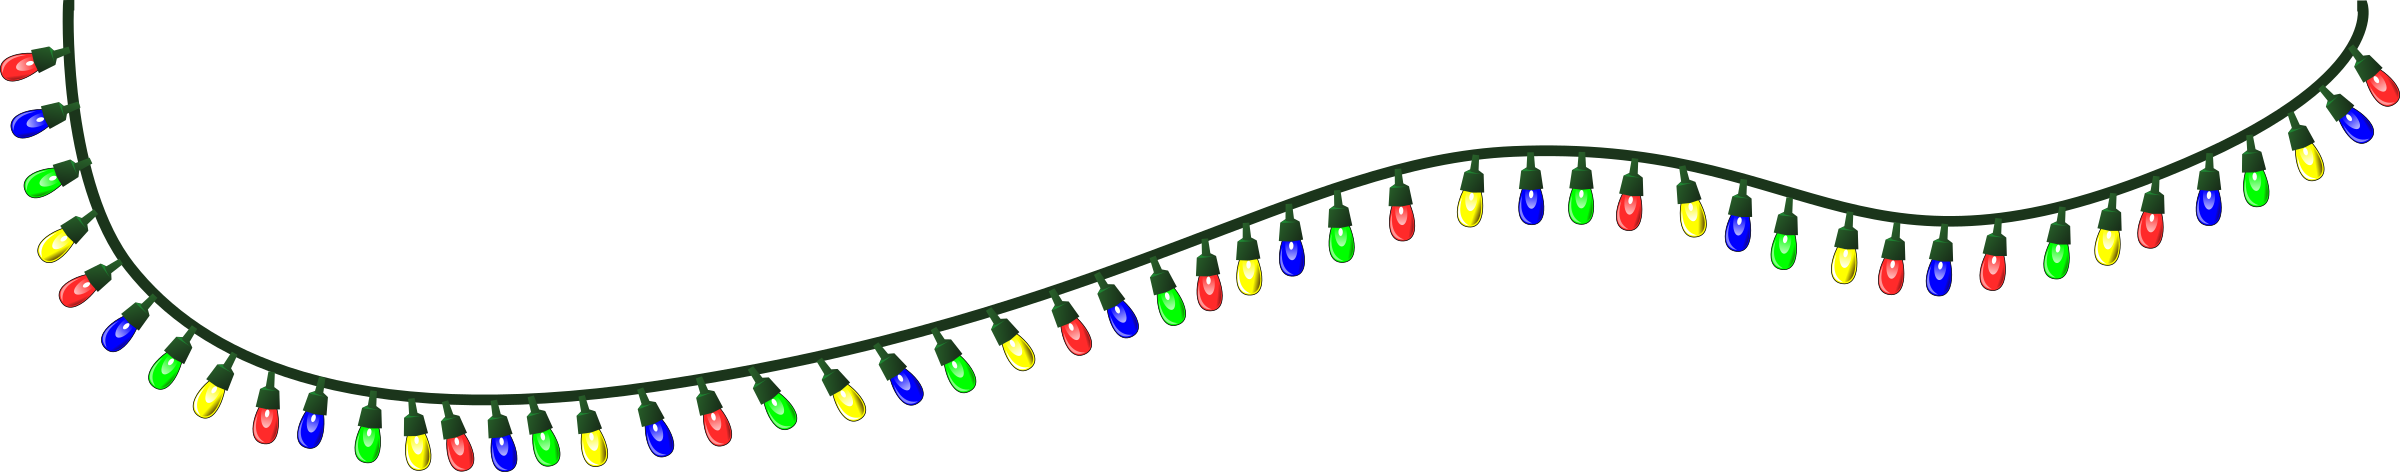 String Of Christmas Lights Clipart 